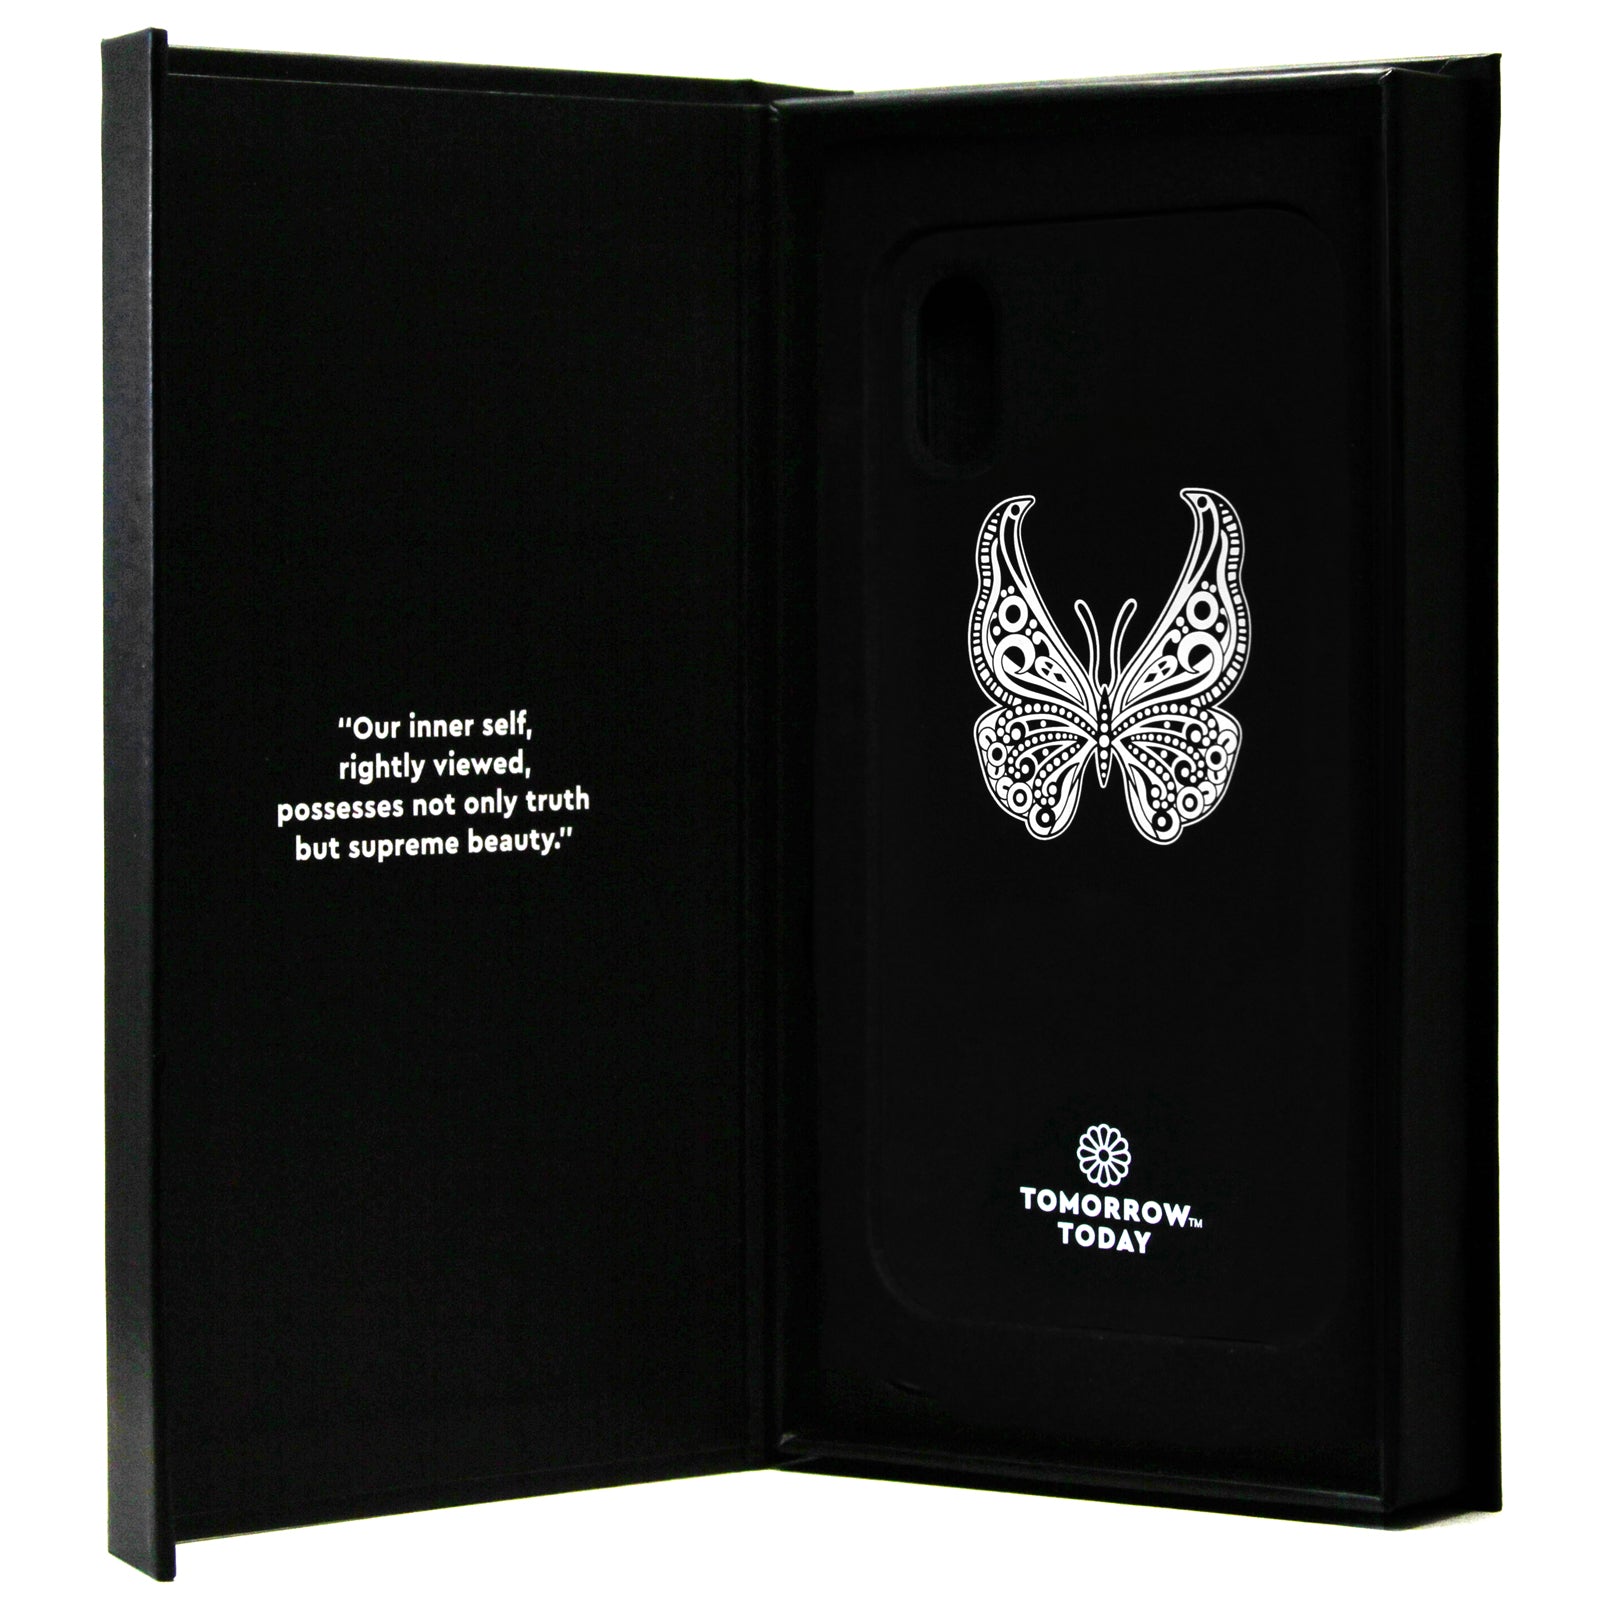 The Butterfly - iPhone X Case